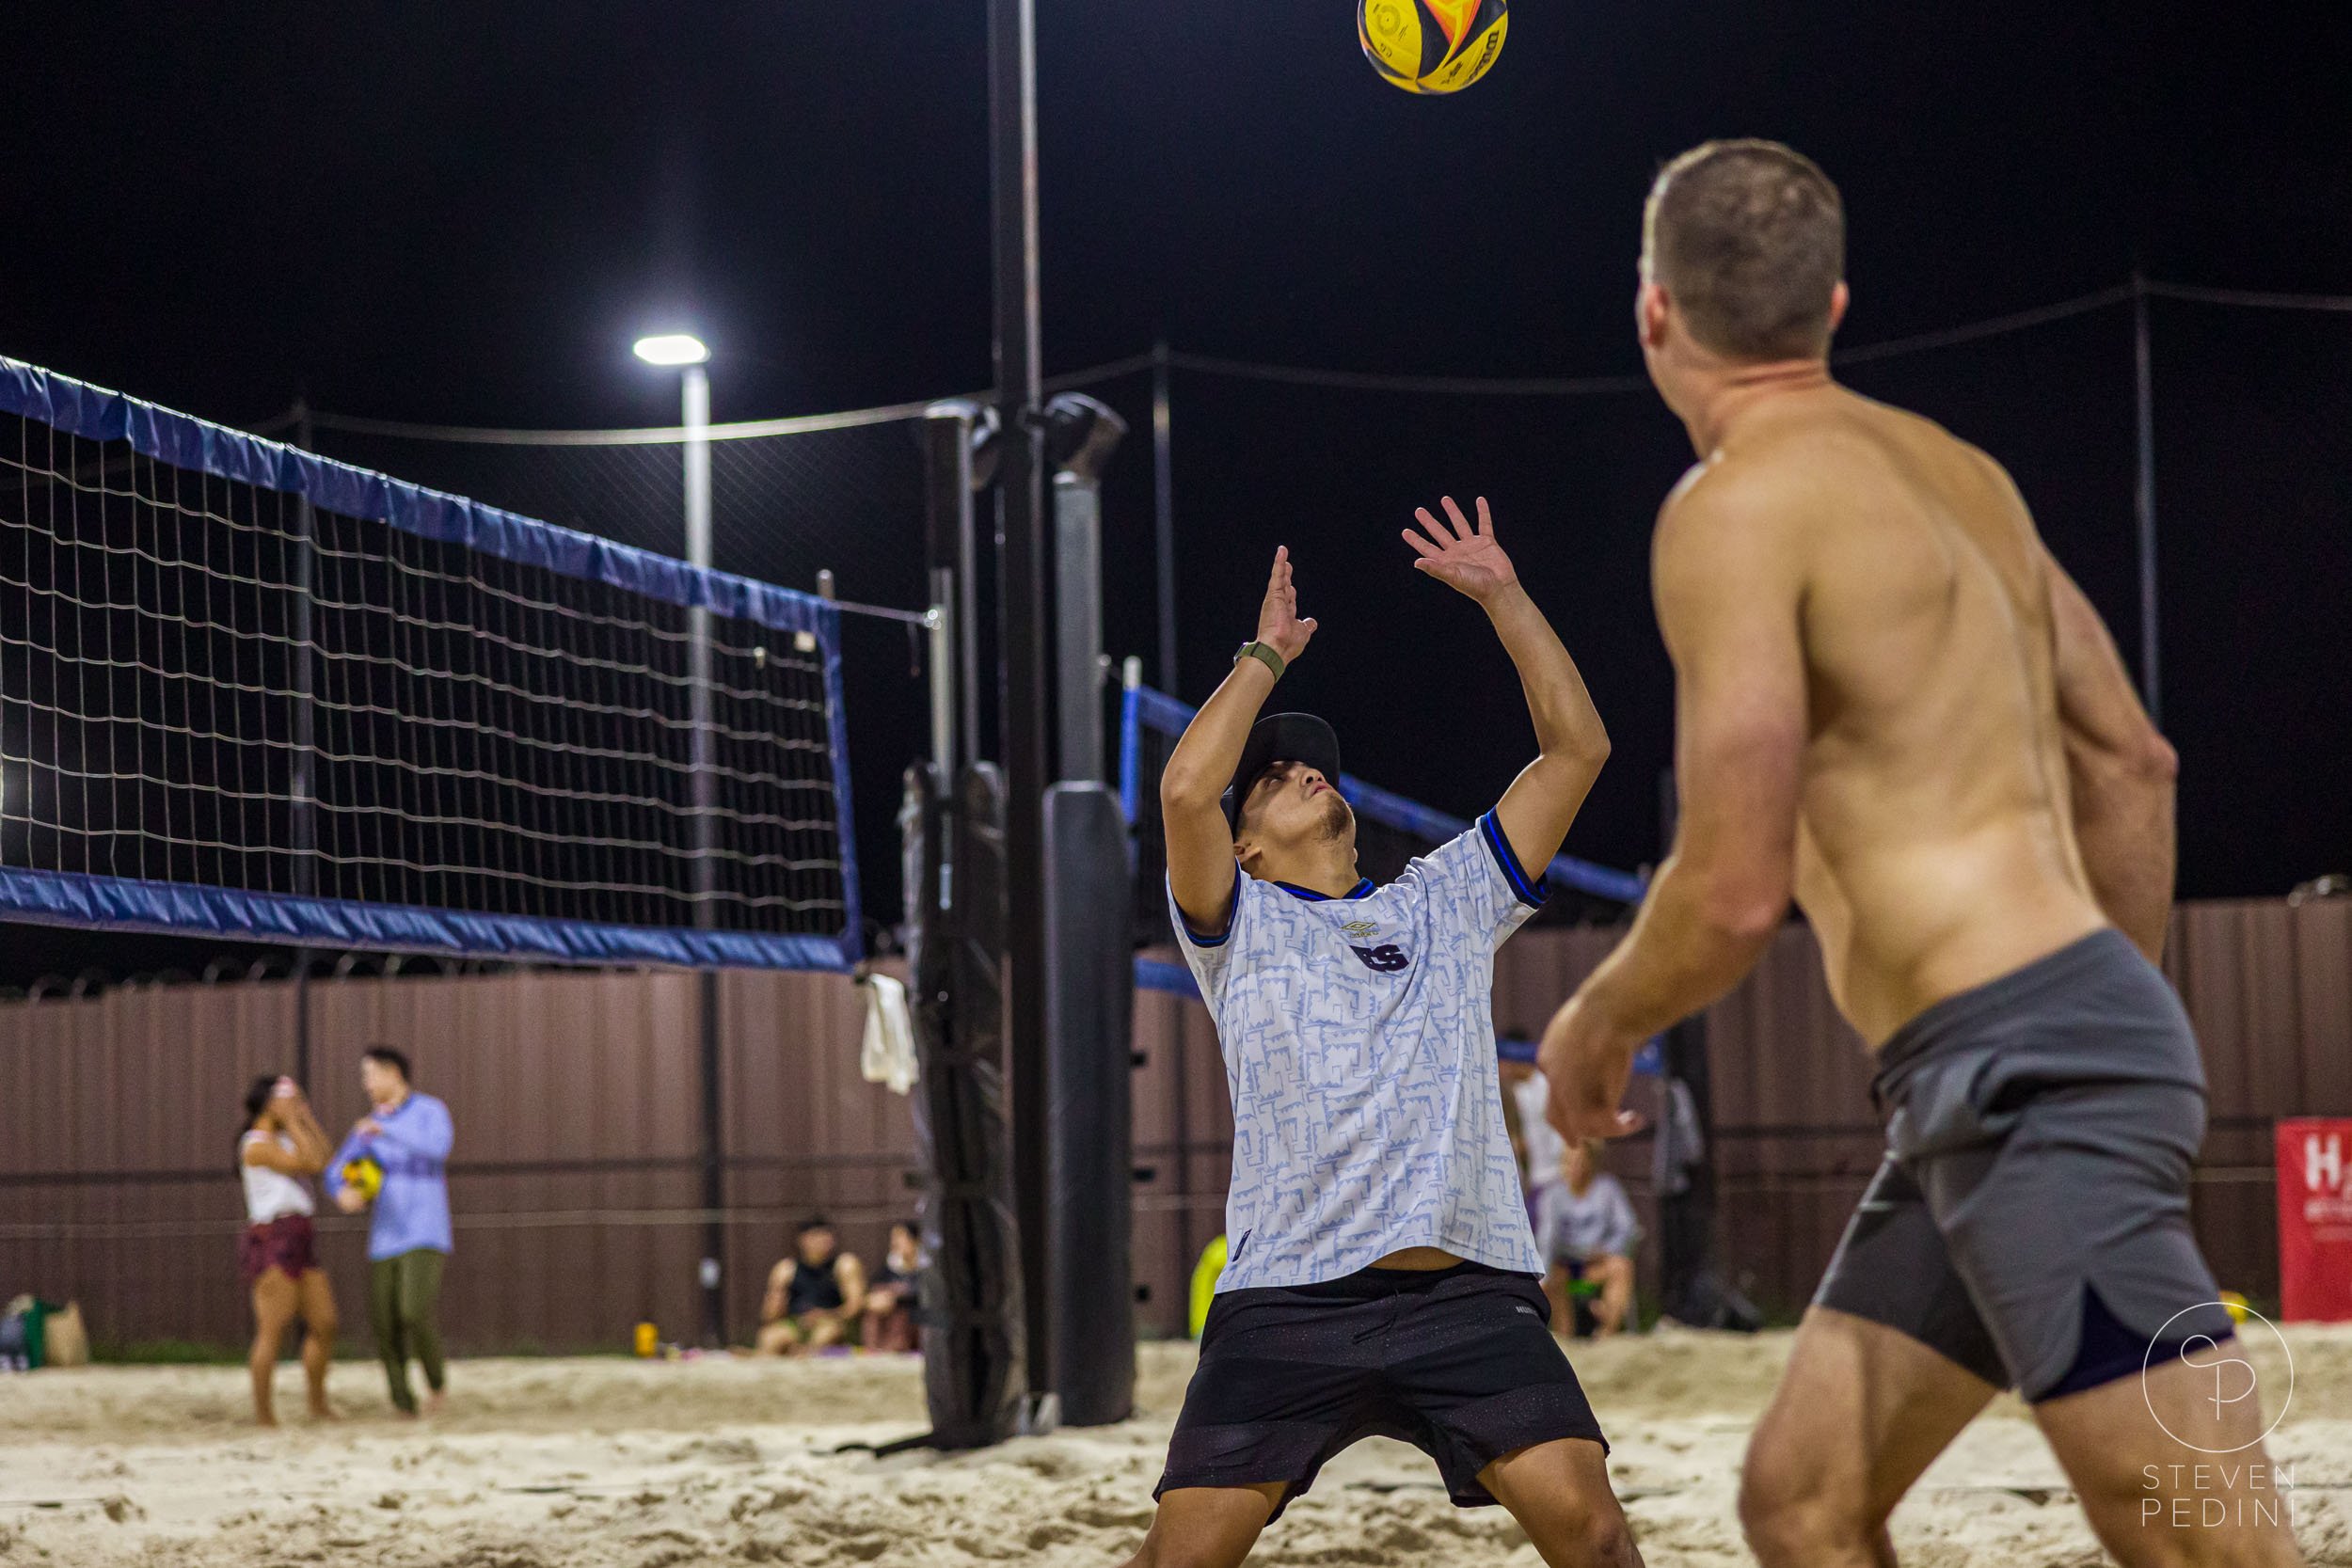 Steven Pedini Photography - Bumpy Pickle - Sand Volleyball - Houston TX - World Cup of Volleyball - 00400.jpg